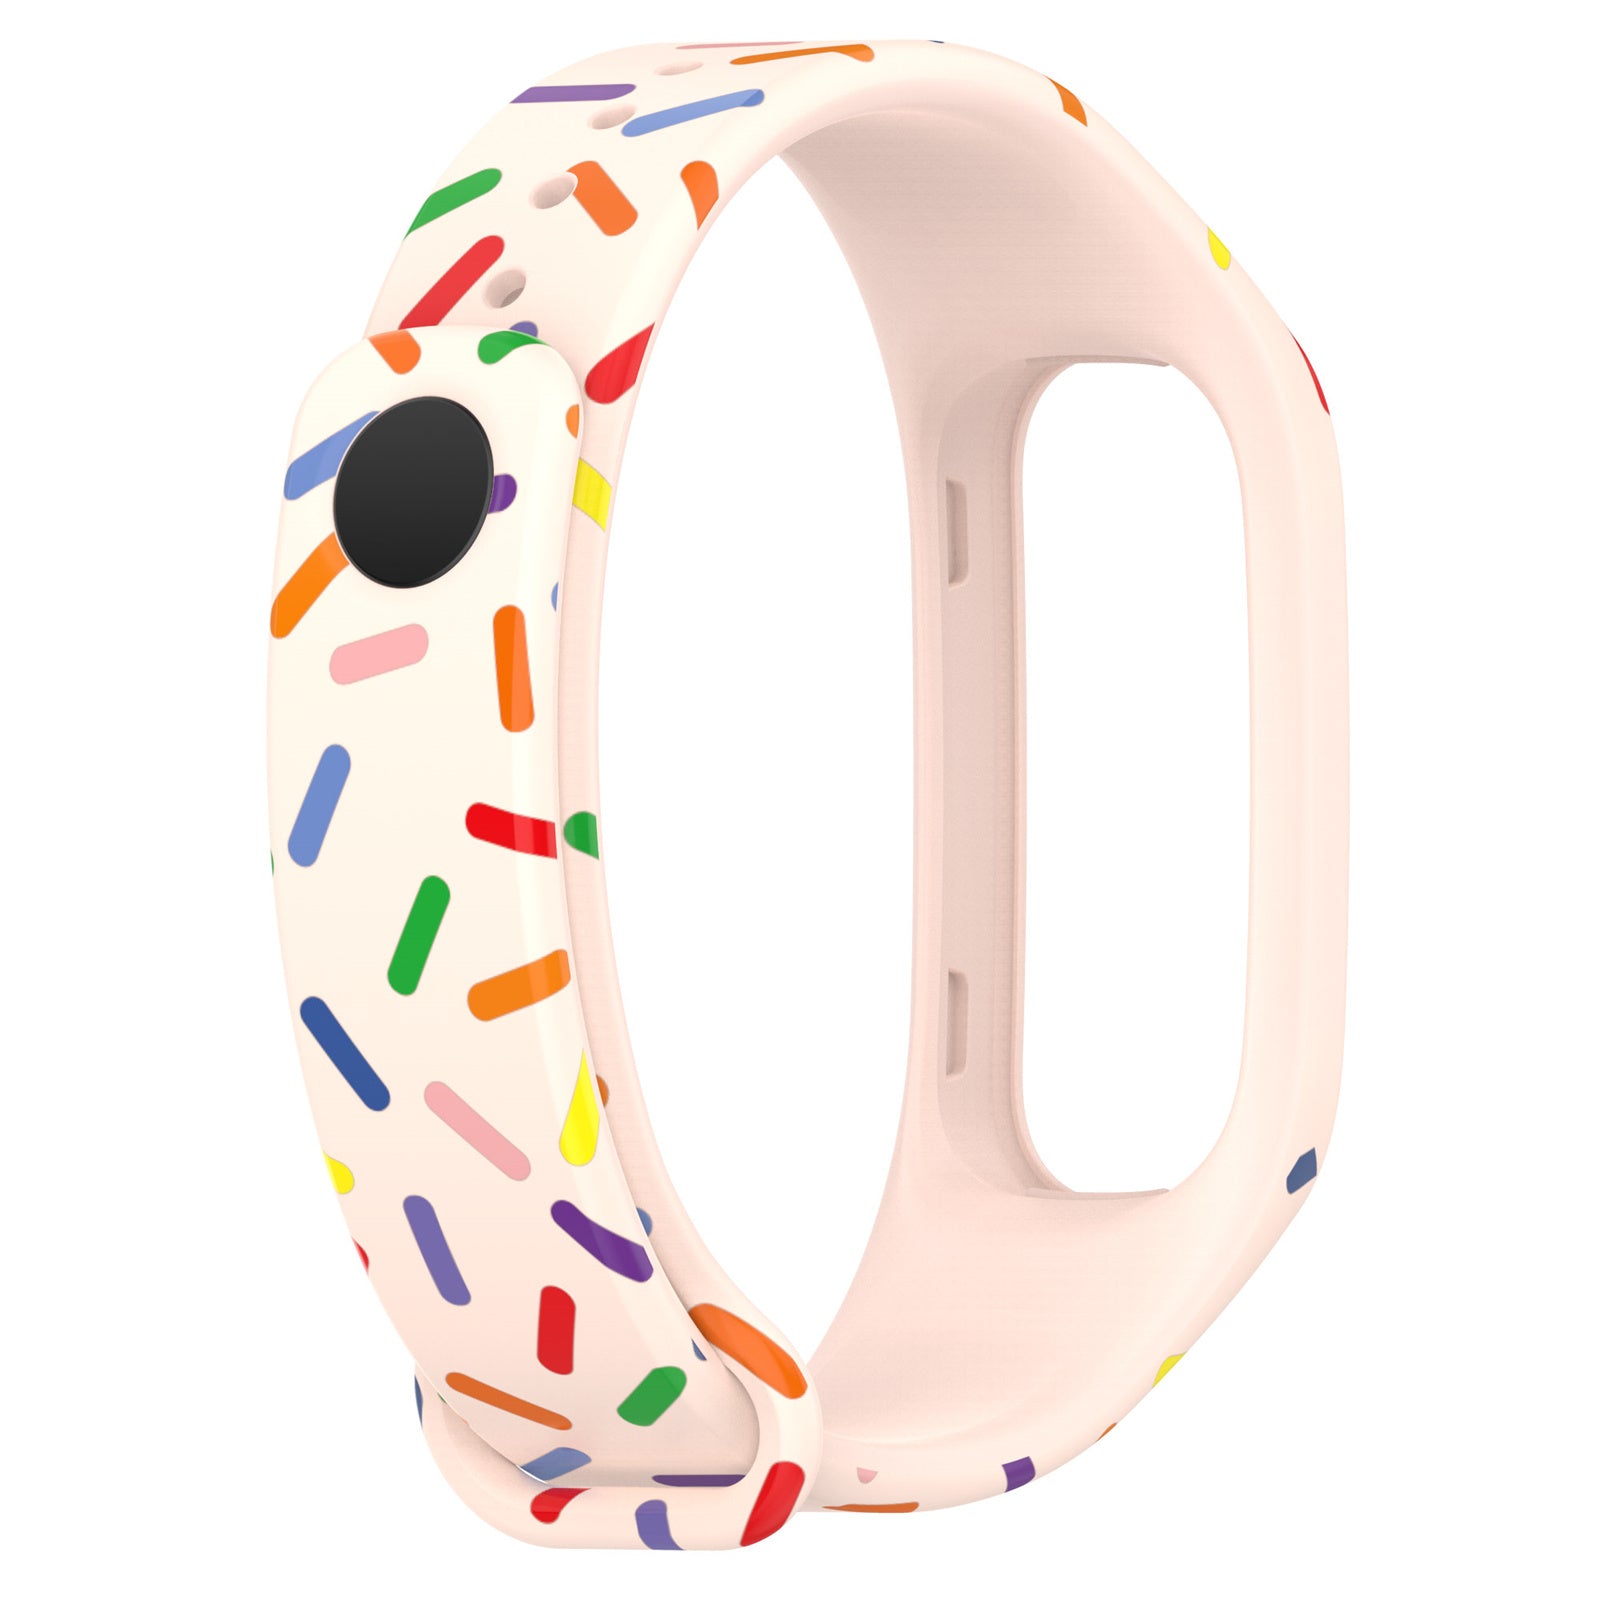 Uniqkart for Oppo Band Integrated Silicone Strap Watch Case Colorful Spotted Wrist Band - Light Pink